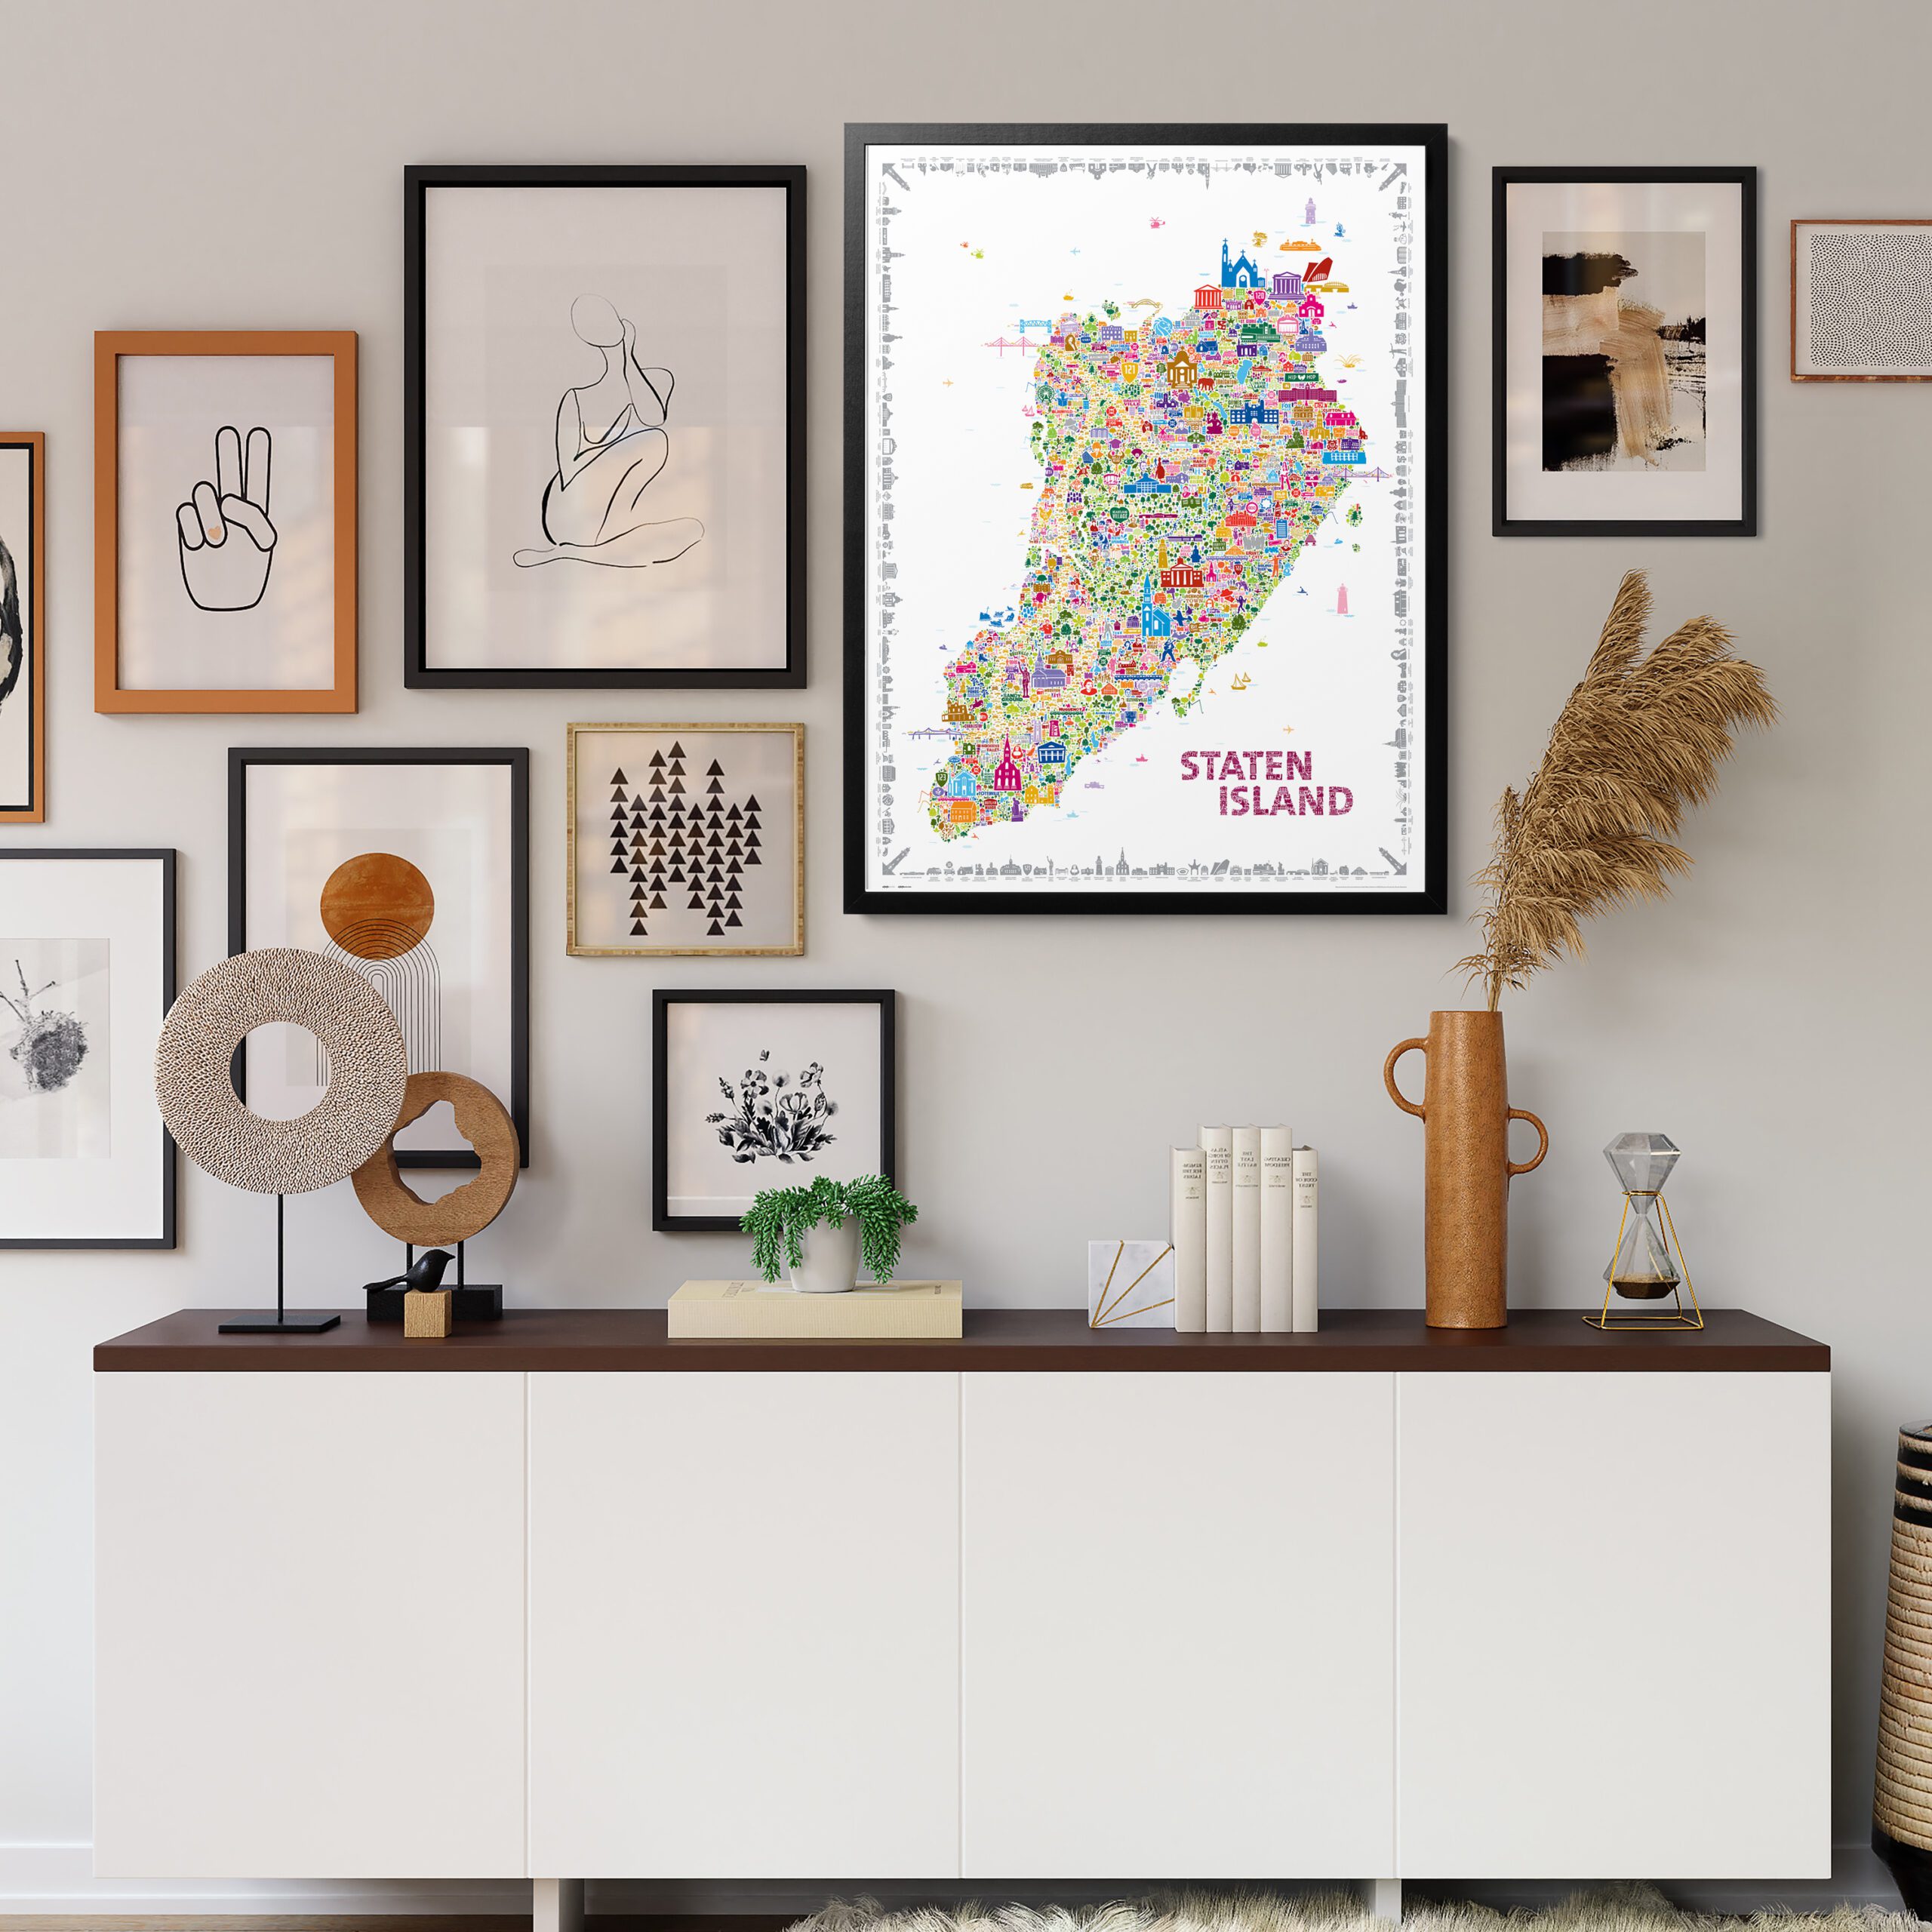 Iconic Staten Island Borough Original Colorful Poster Artwork for Home Office Walls Cool Designer Wall Art Trendy Glam Map Aesthetic Fashion Decor Vintage NYC Travel Posters Unique Fun Maps Perfect Holiday Housewarming Gift Souvenirs Fun Paper Prints